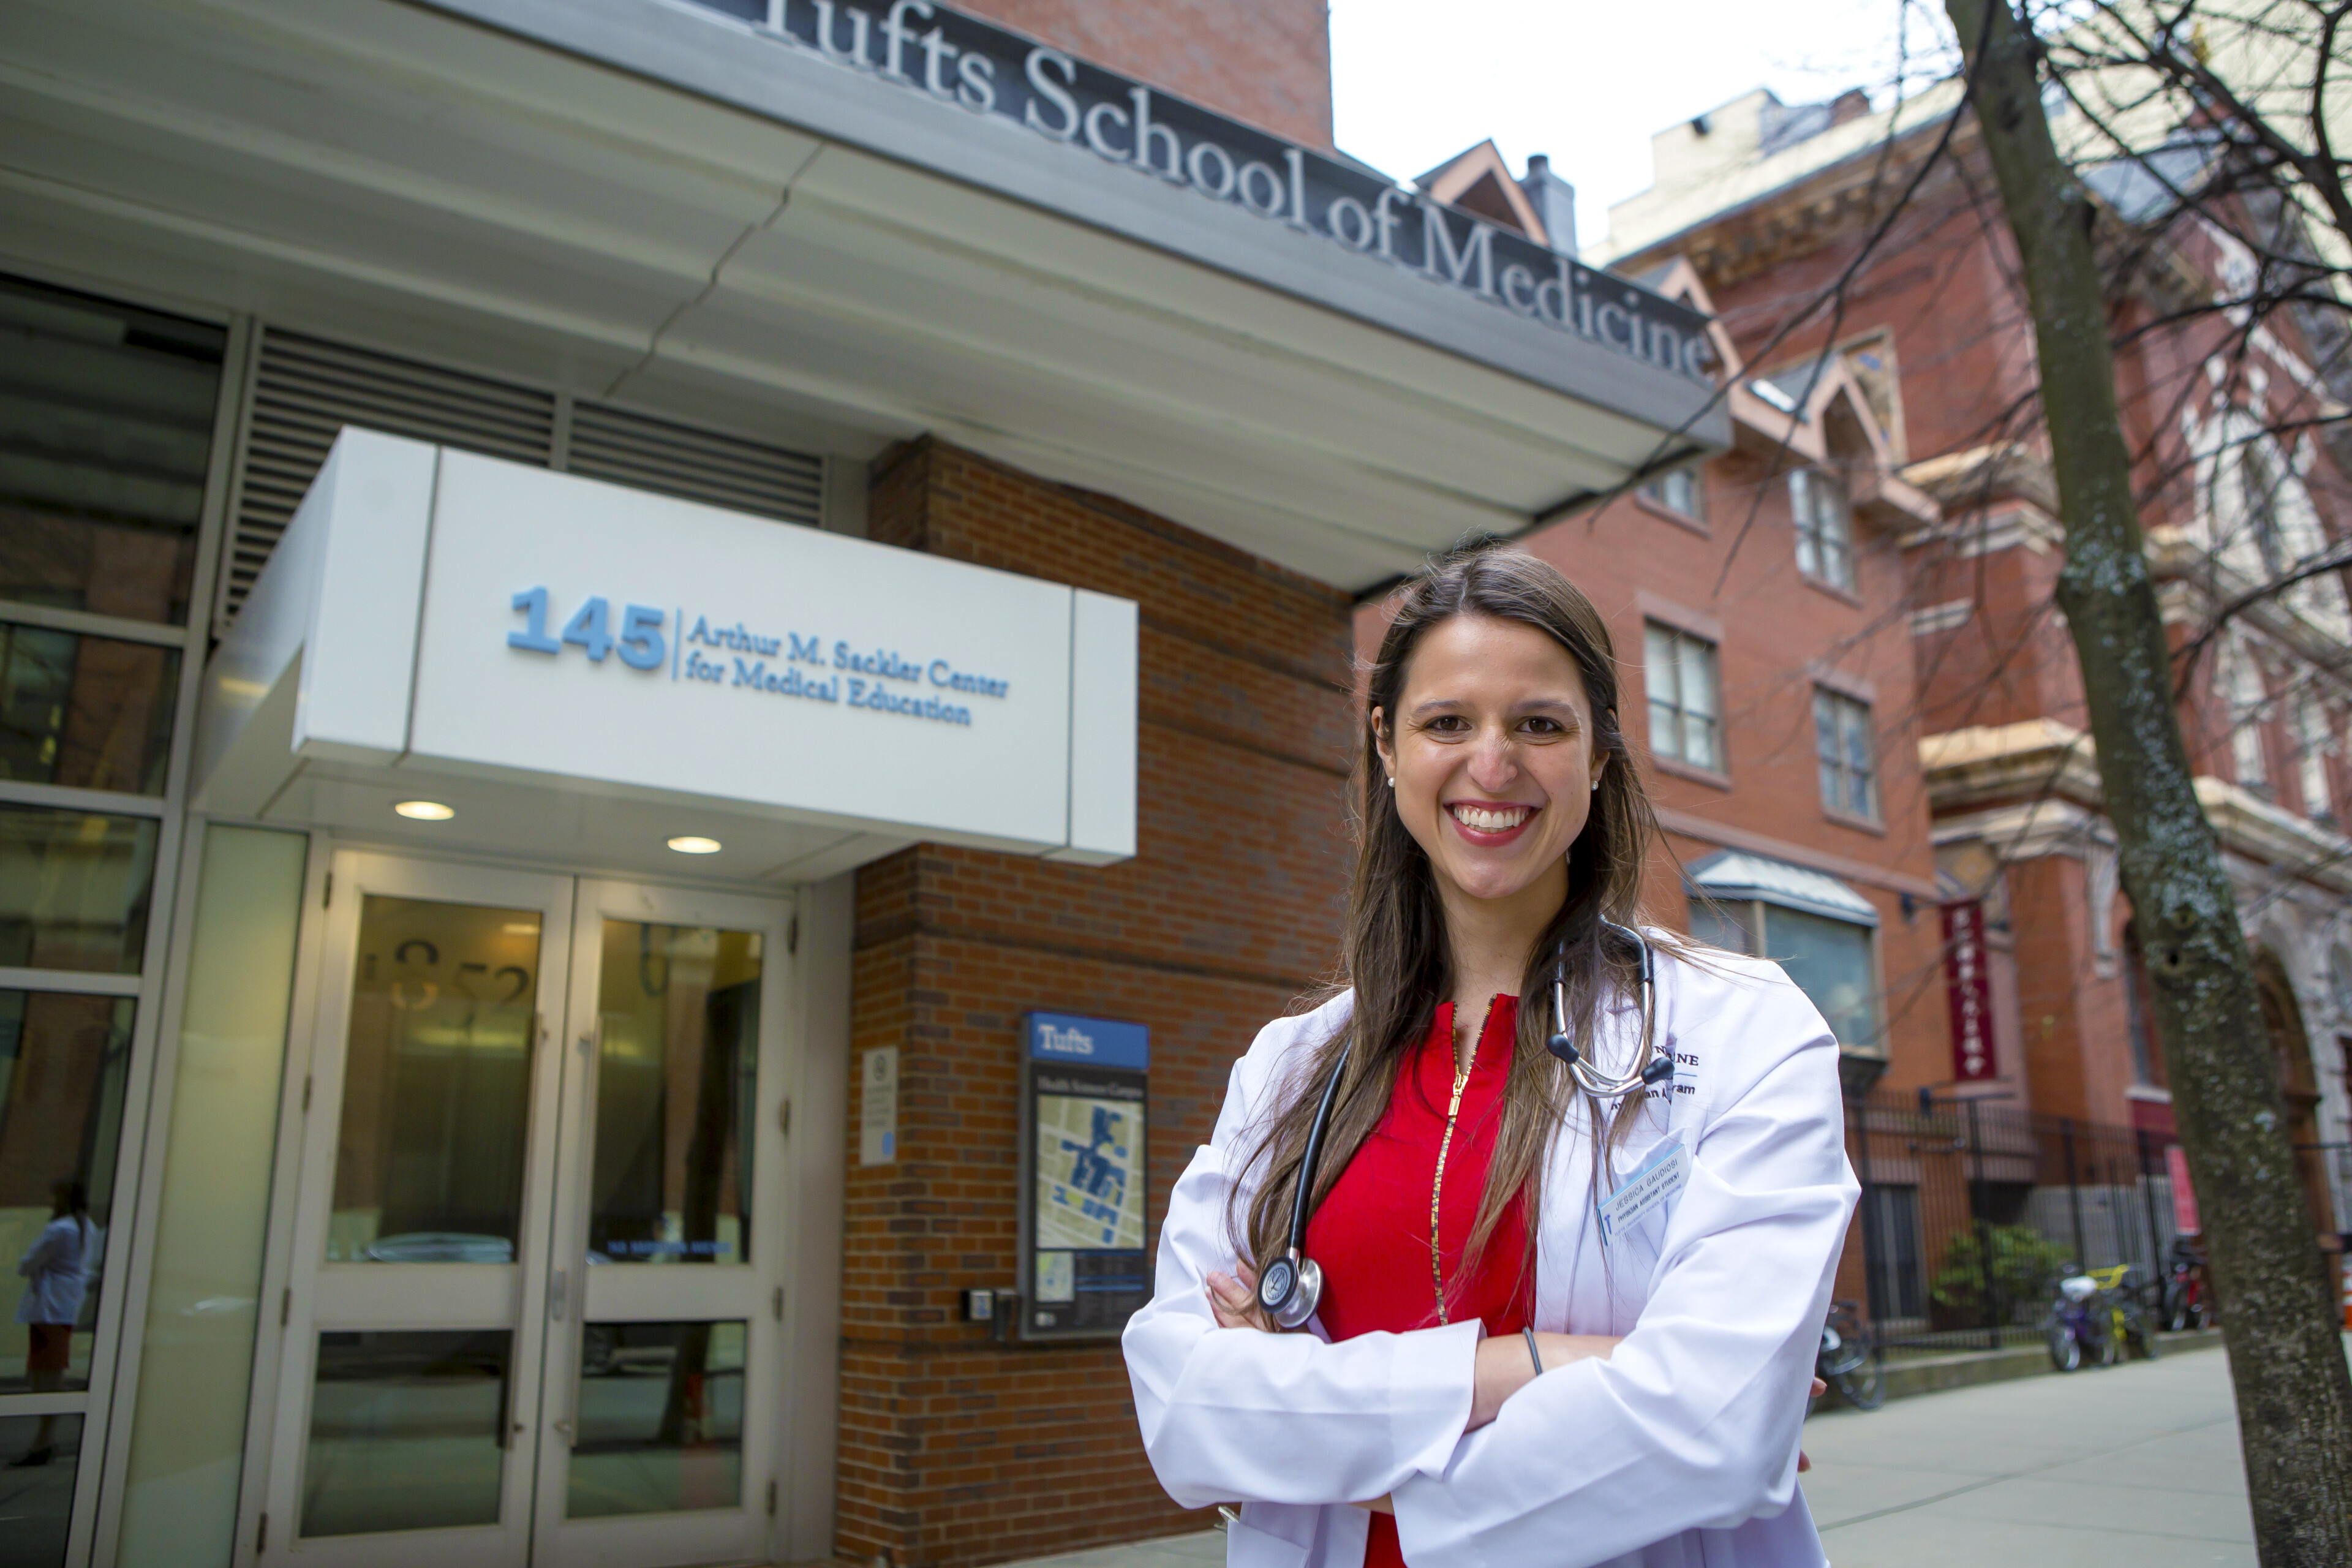 Jessica Gaudiosi smiling with arms crossed in front of the Tufts School of Medicine